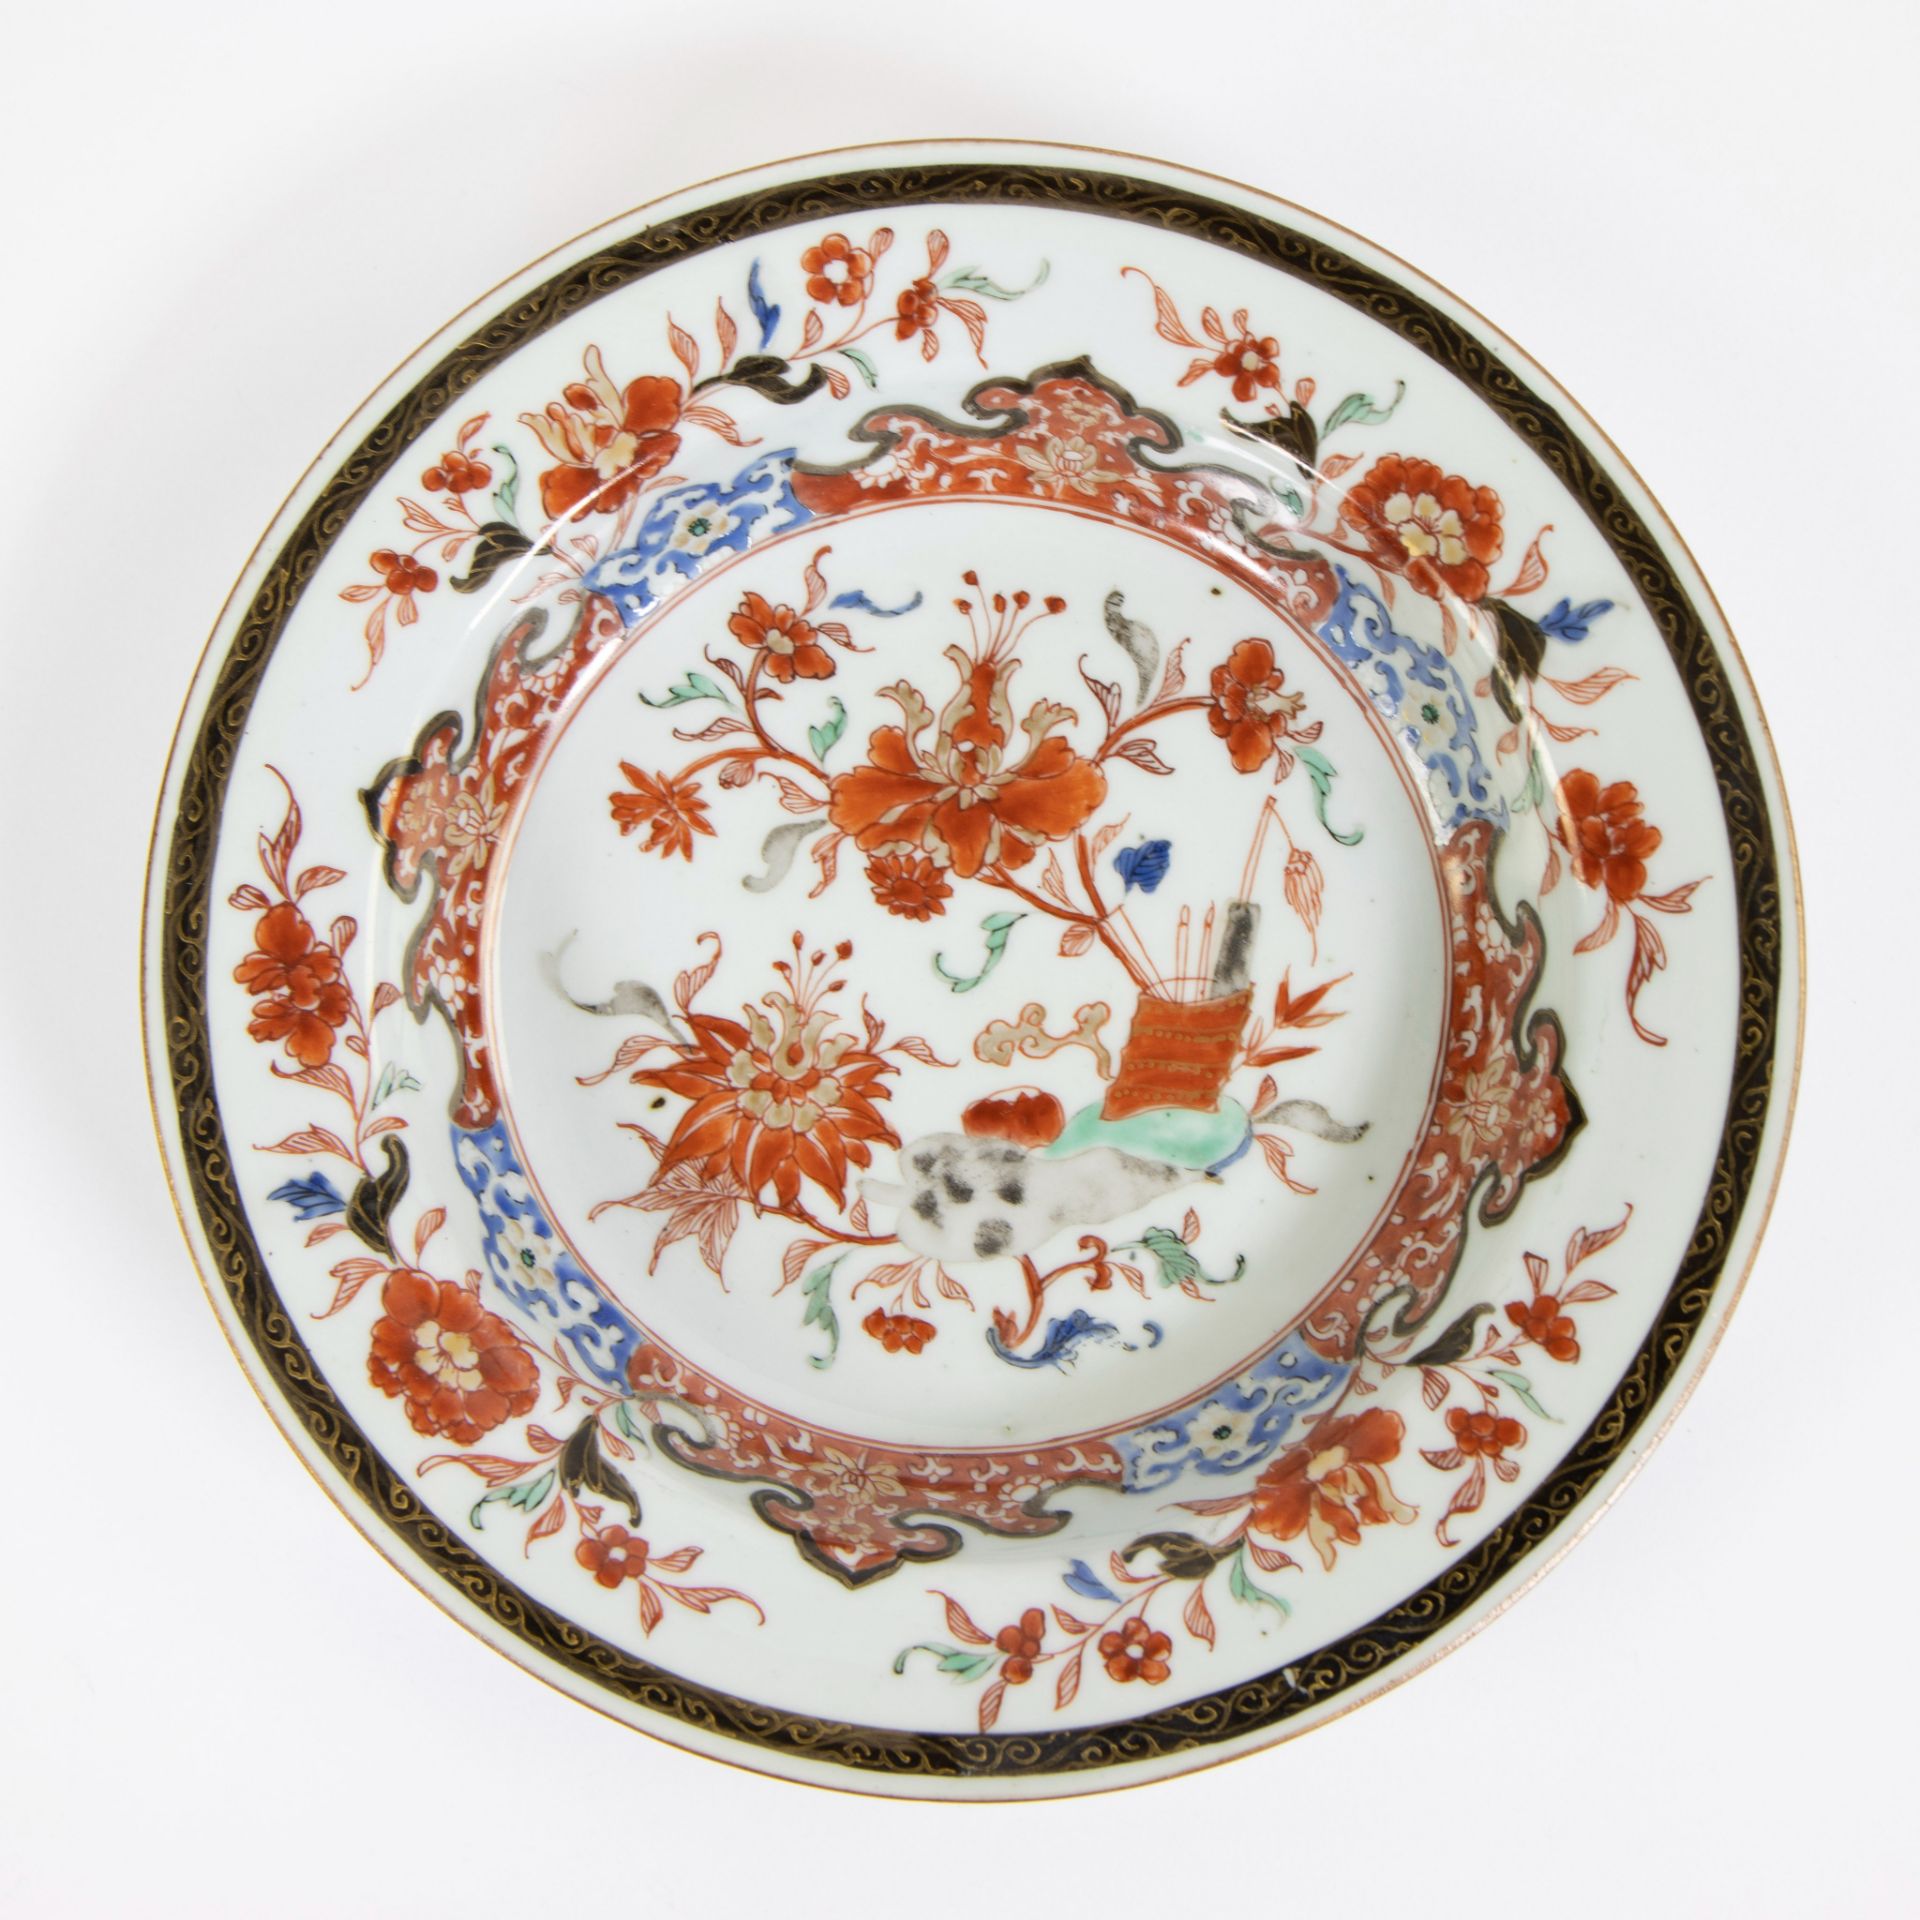 Two 18th century Chinese plates with floral decor, Qianlong period - Image 5 of 6